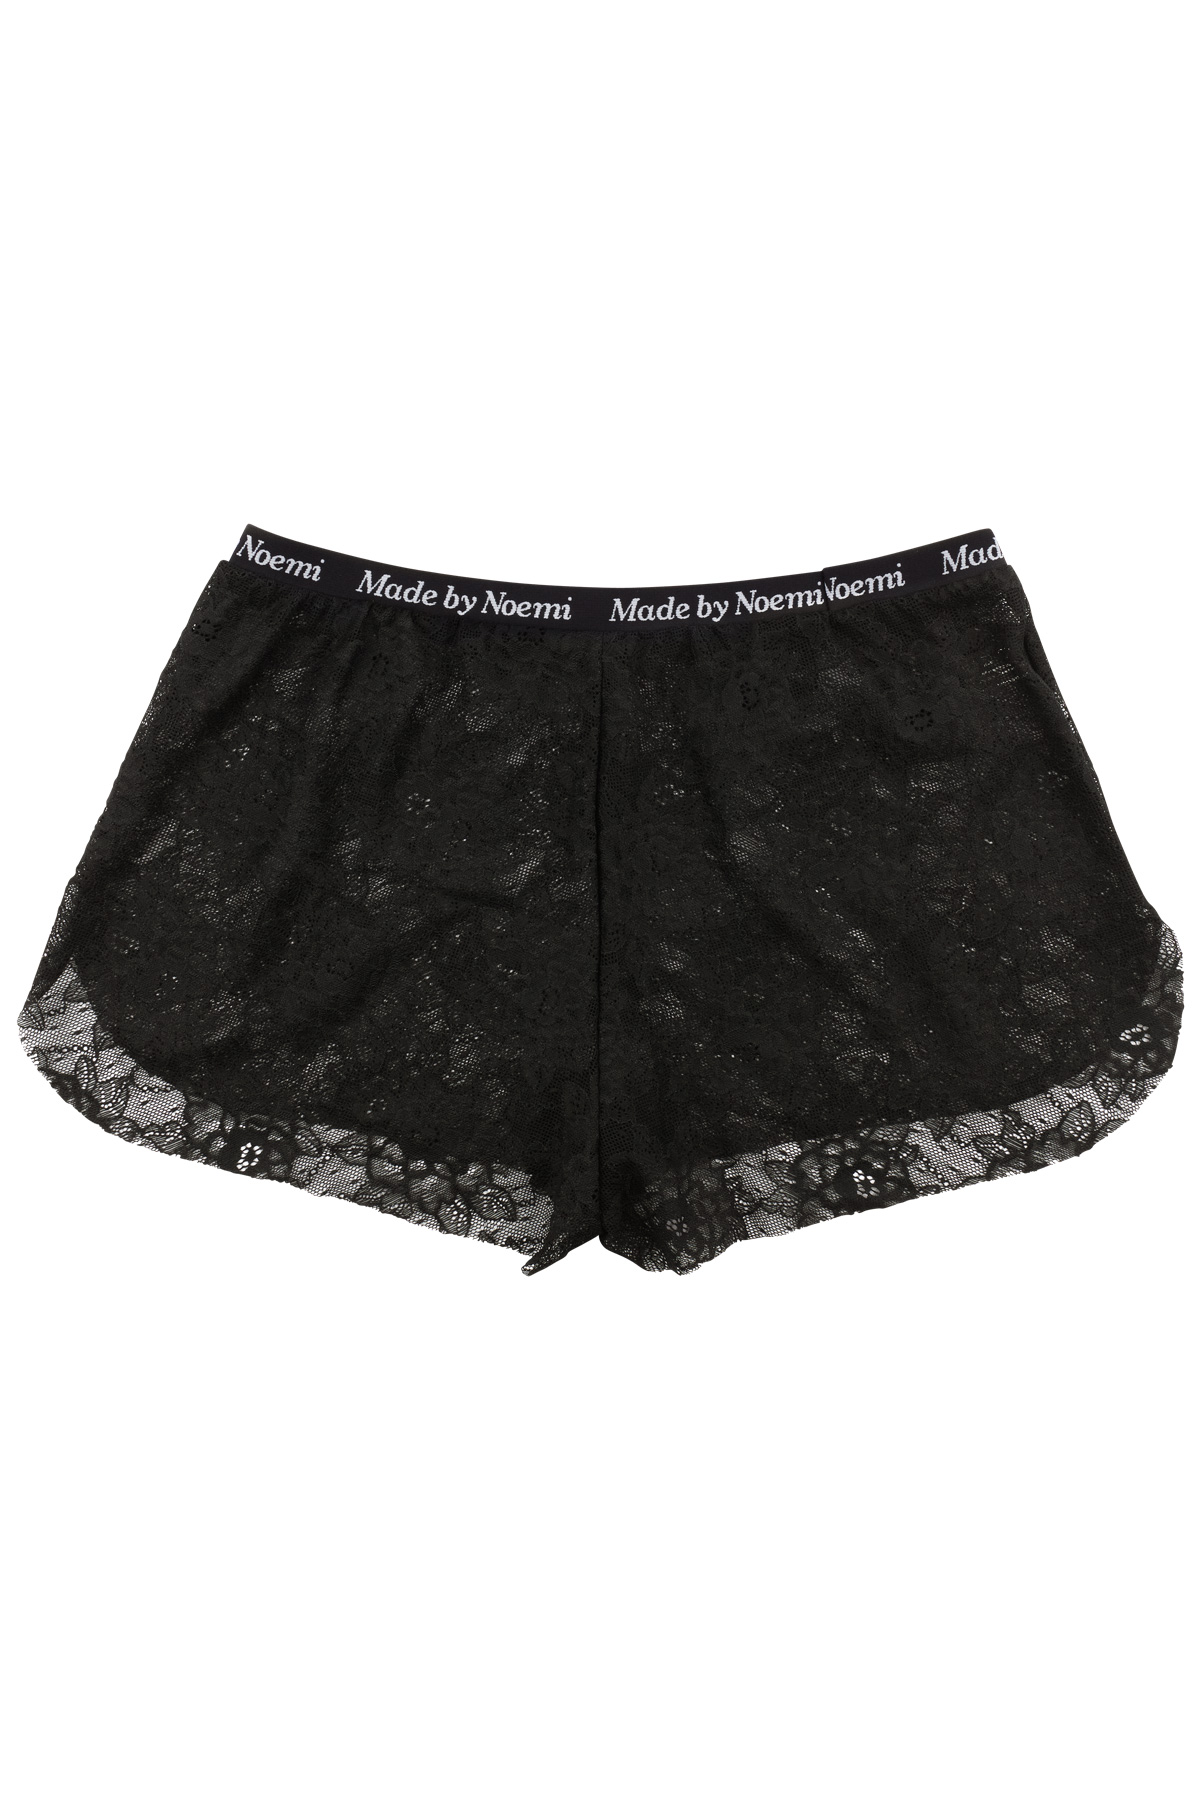 Black Lace boxer shorts - Made by Noemi